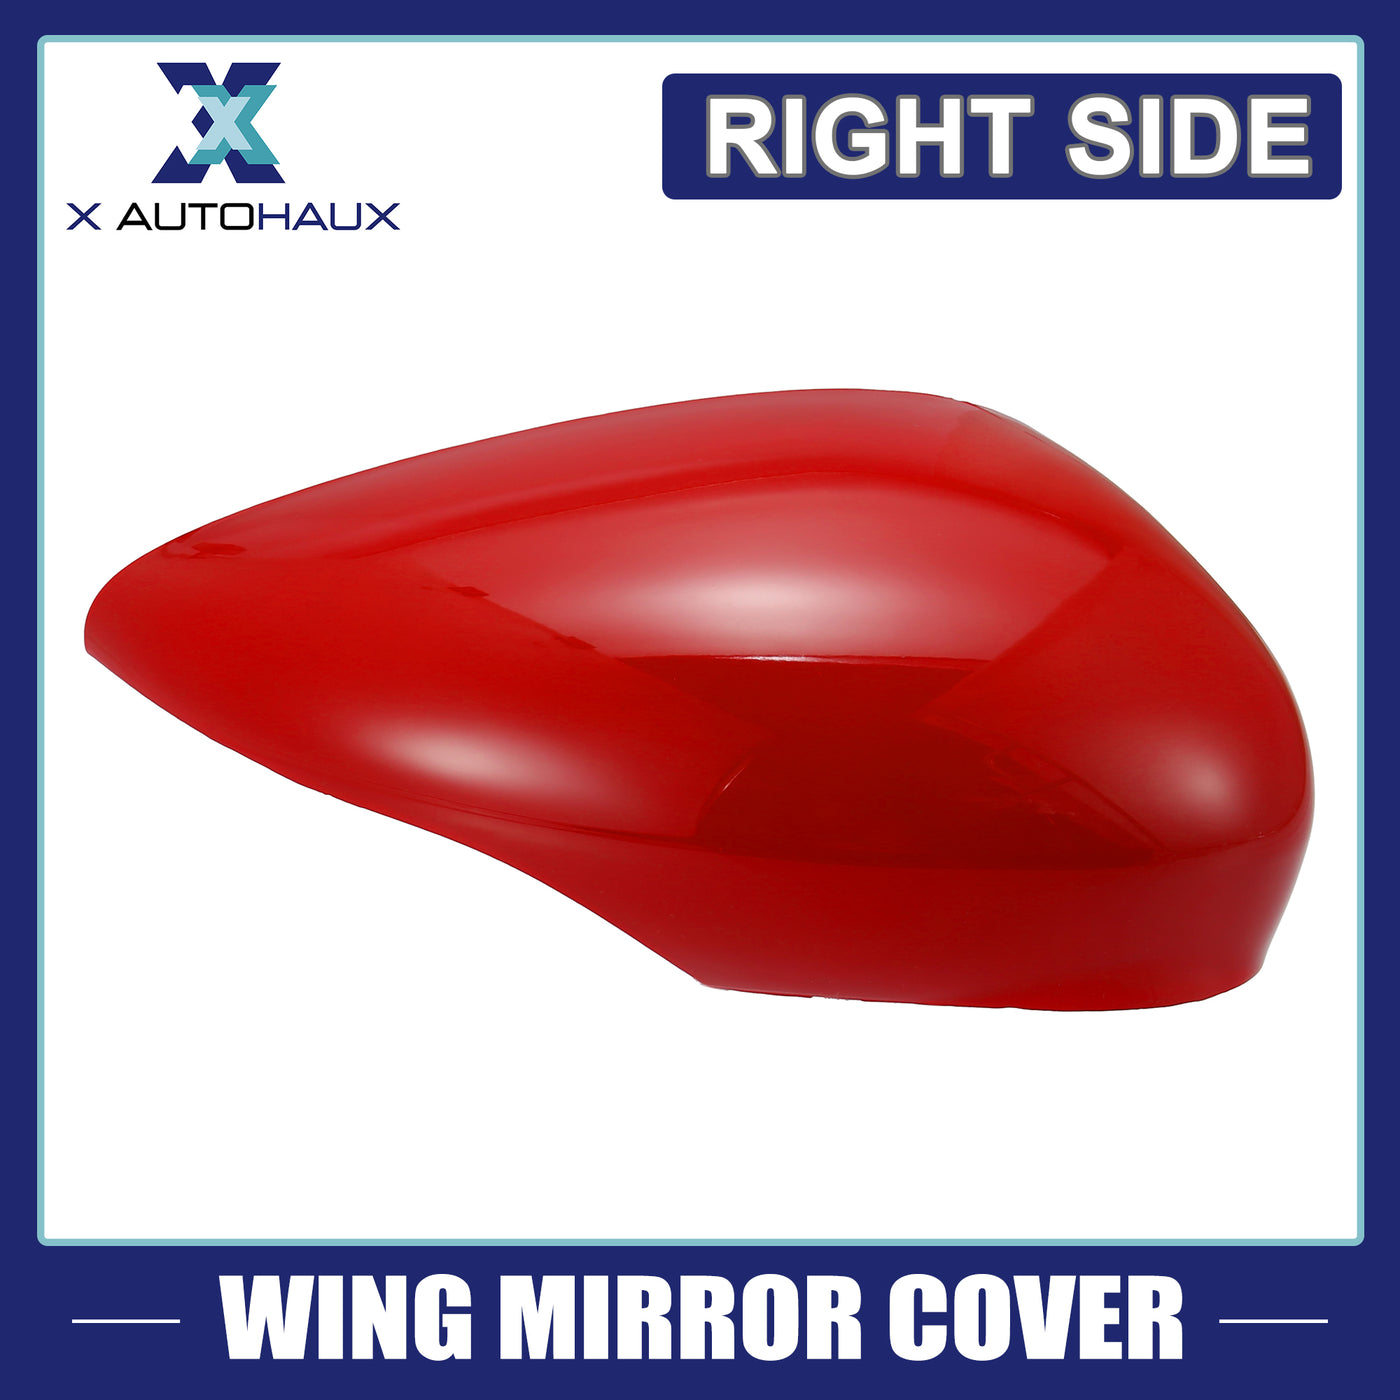 X AUTOHAUX Red Left Side Car Side Door Wing Mirror Cover Rear View Mirror Cap for Ford Fiesta MK7 2008 2009 2010 2011 2012 2013 2014 2015 2016 2017